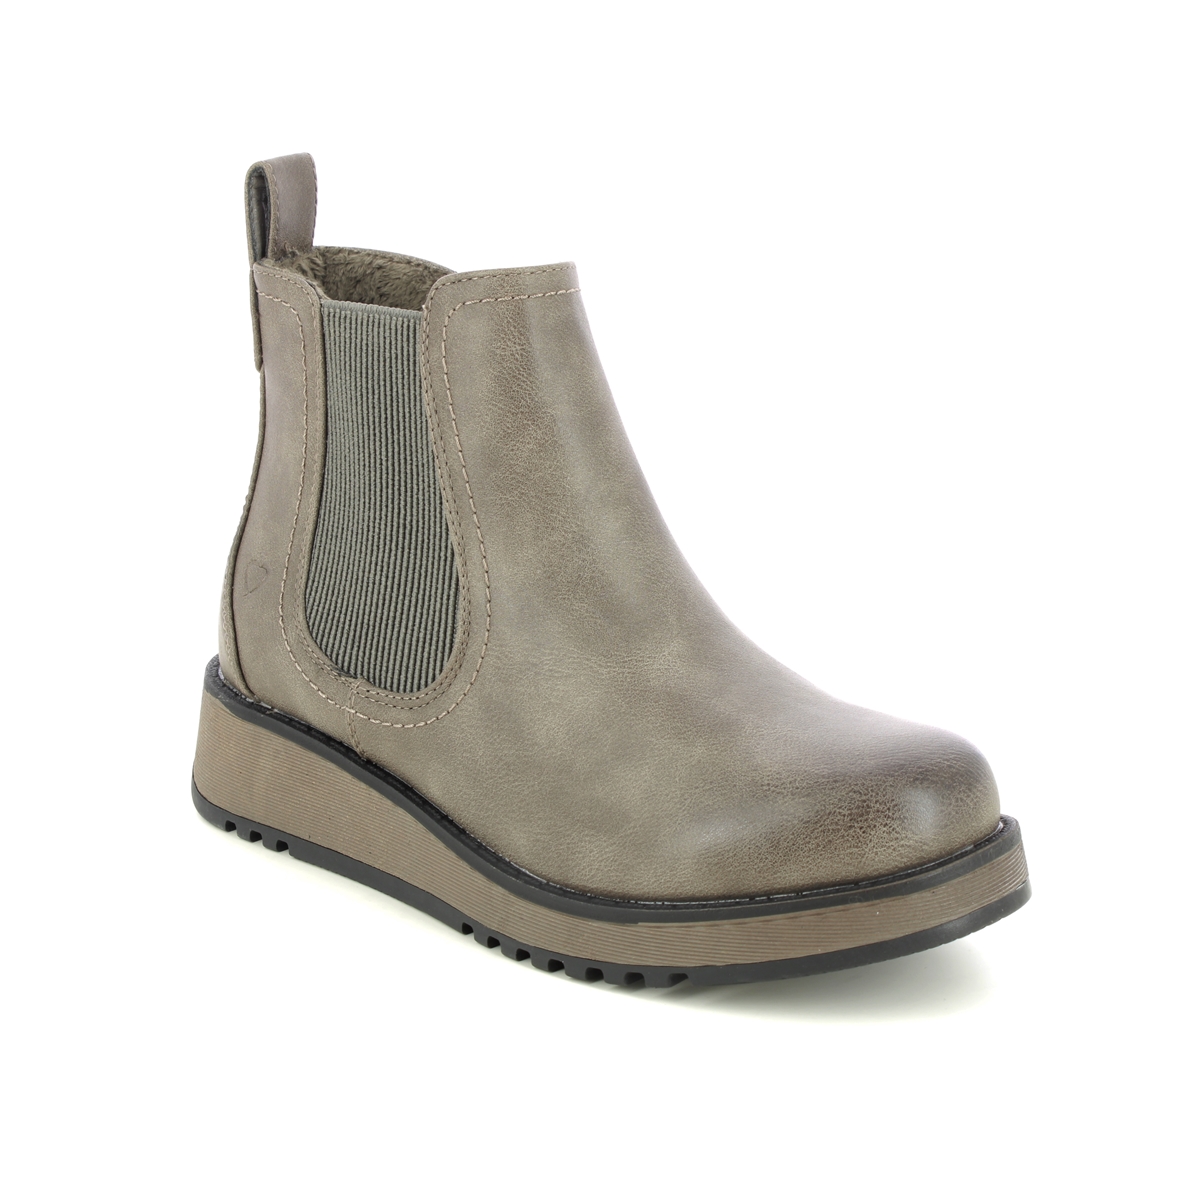 Heavenly Feet Rolo   2 New Dark Taupe Womens Chelsea Boots 3503-50 In Size 6 In Plain Dark Taupe